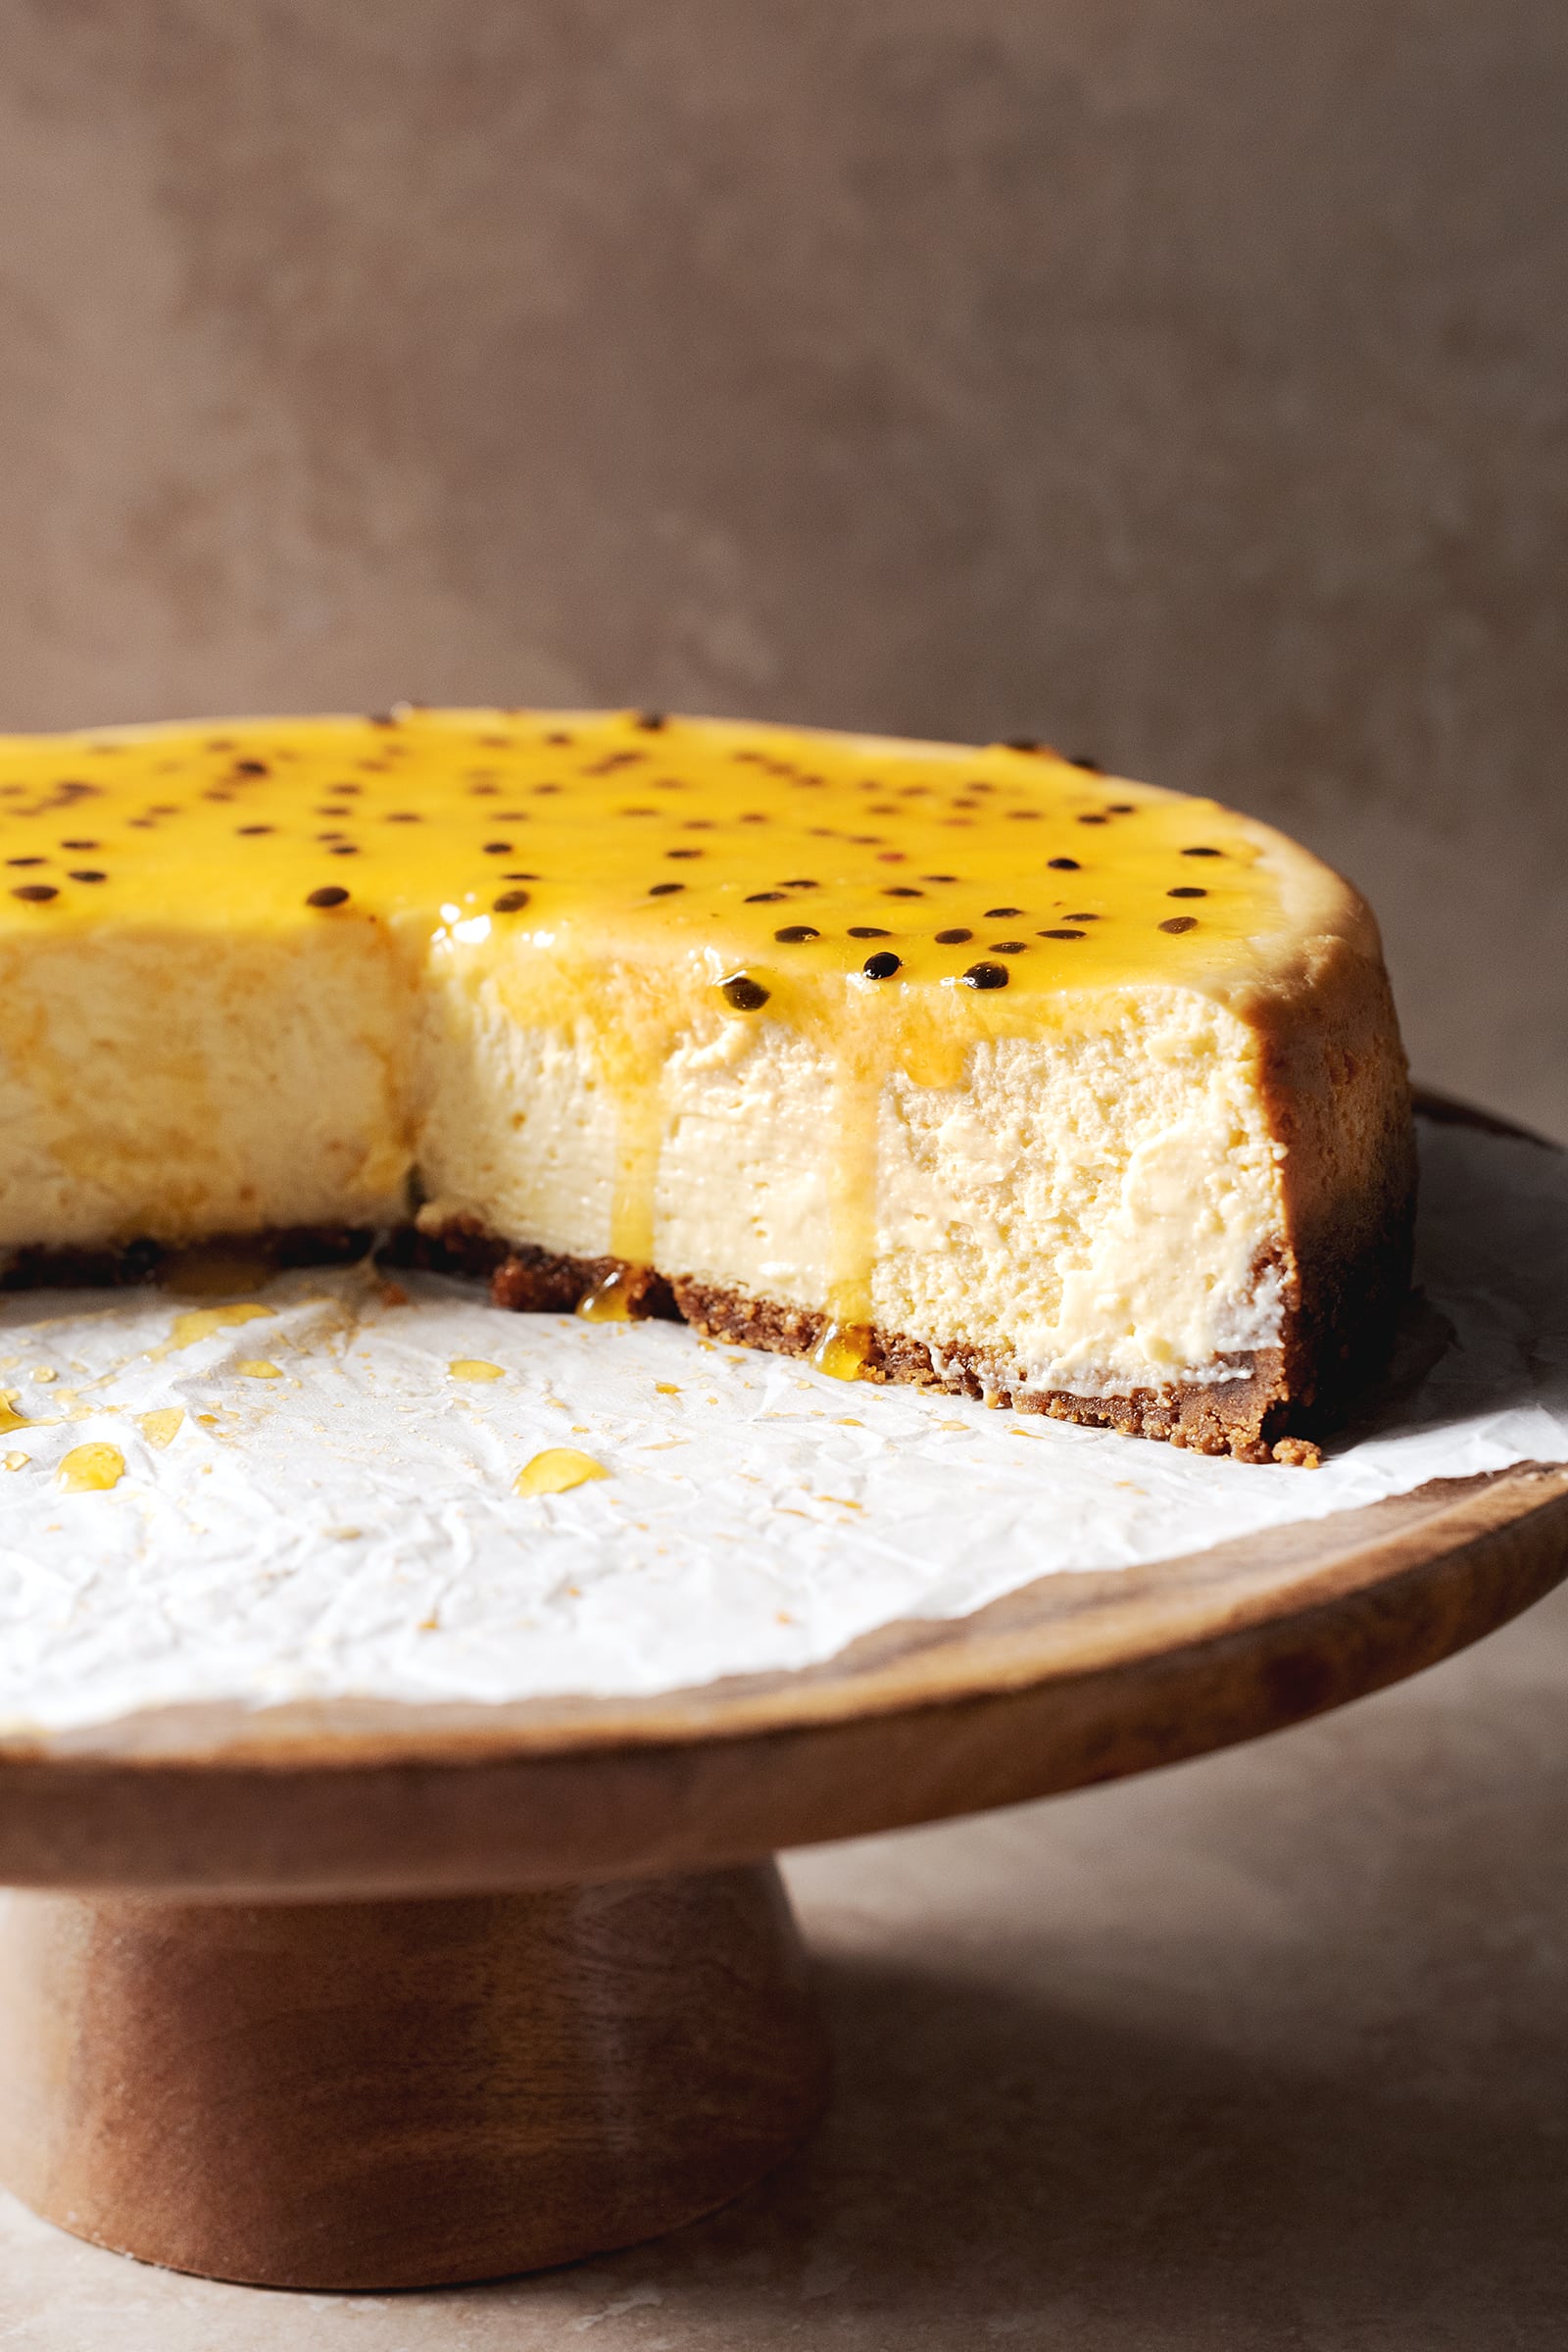 Cross section of a cheesecake with passionfruit puree dripping down the front.